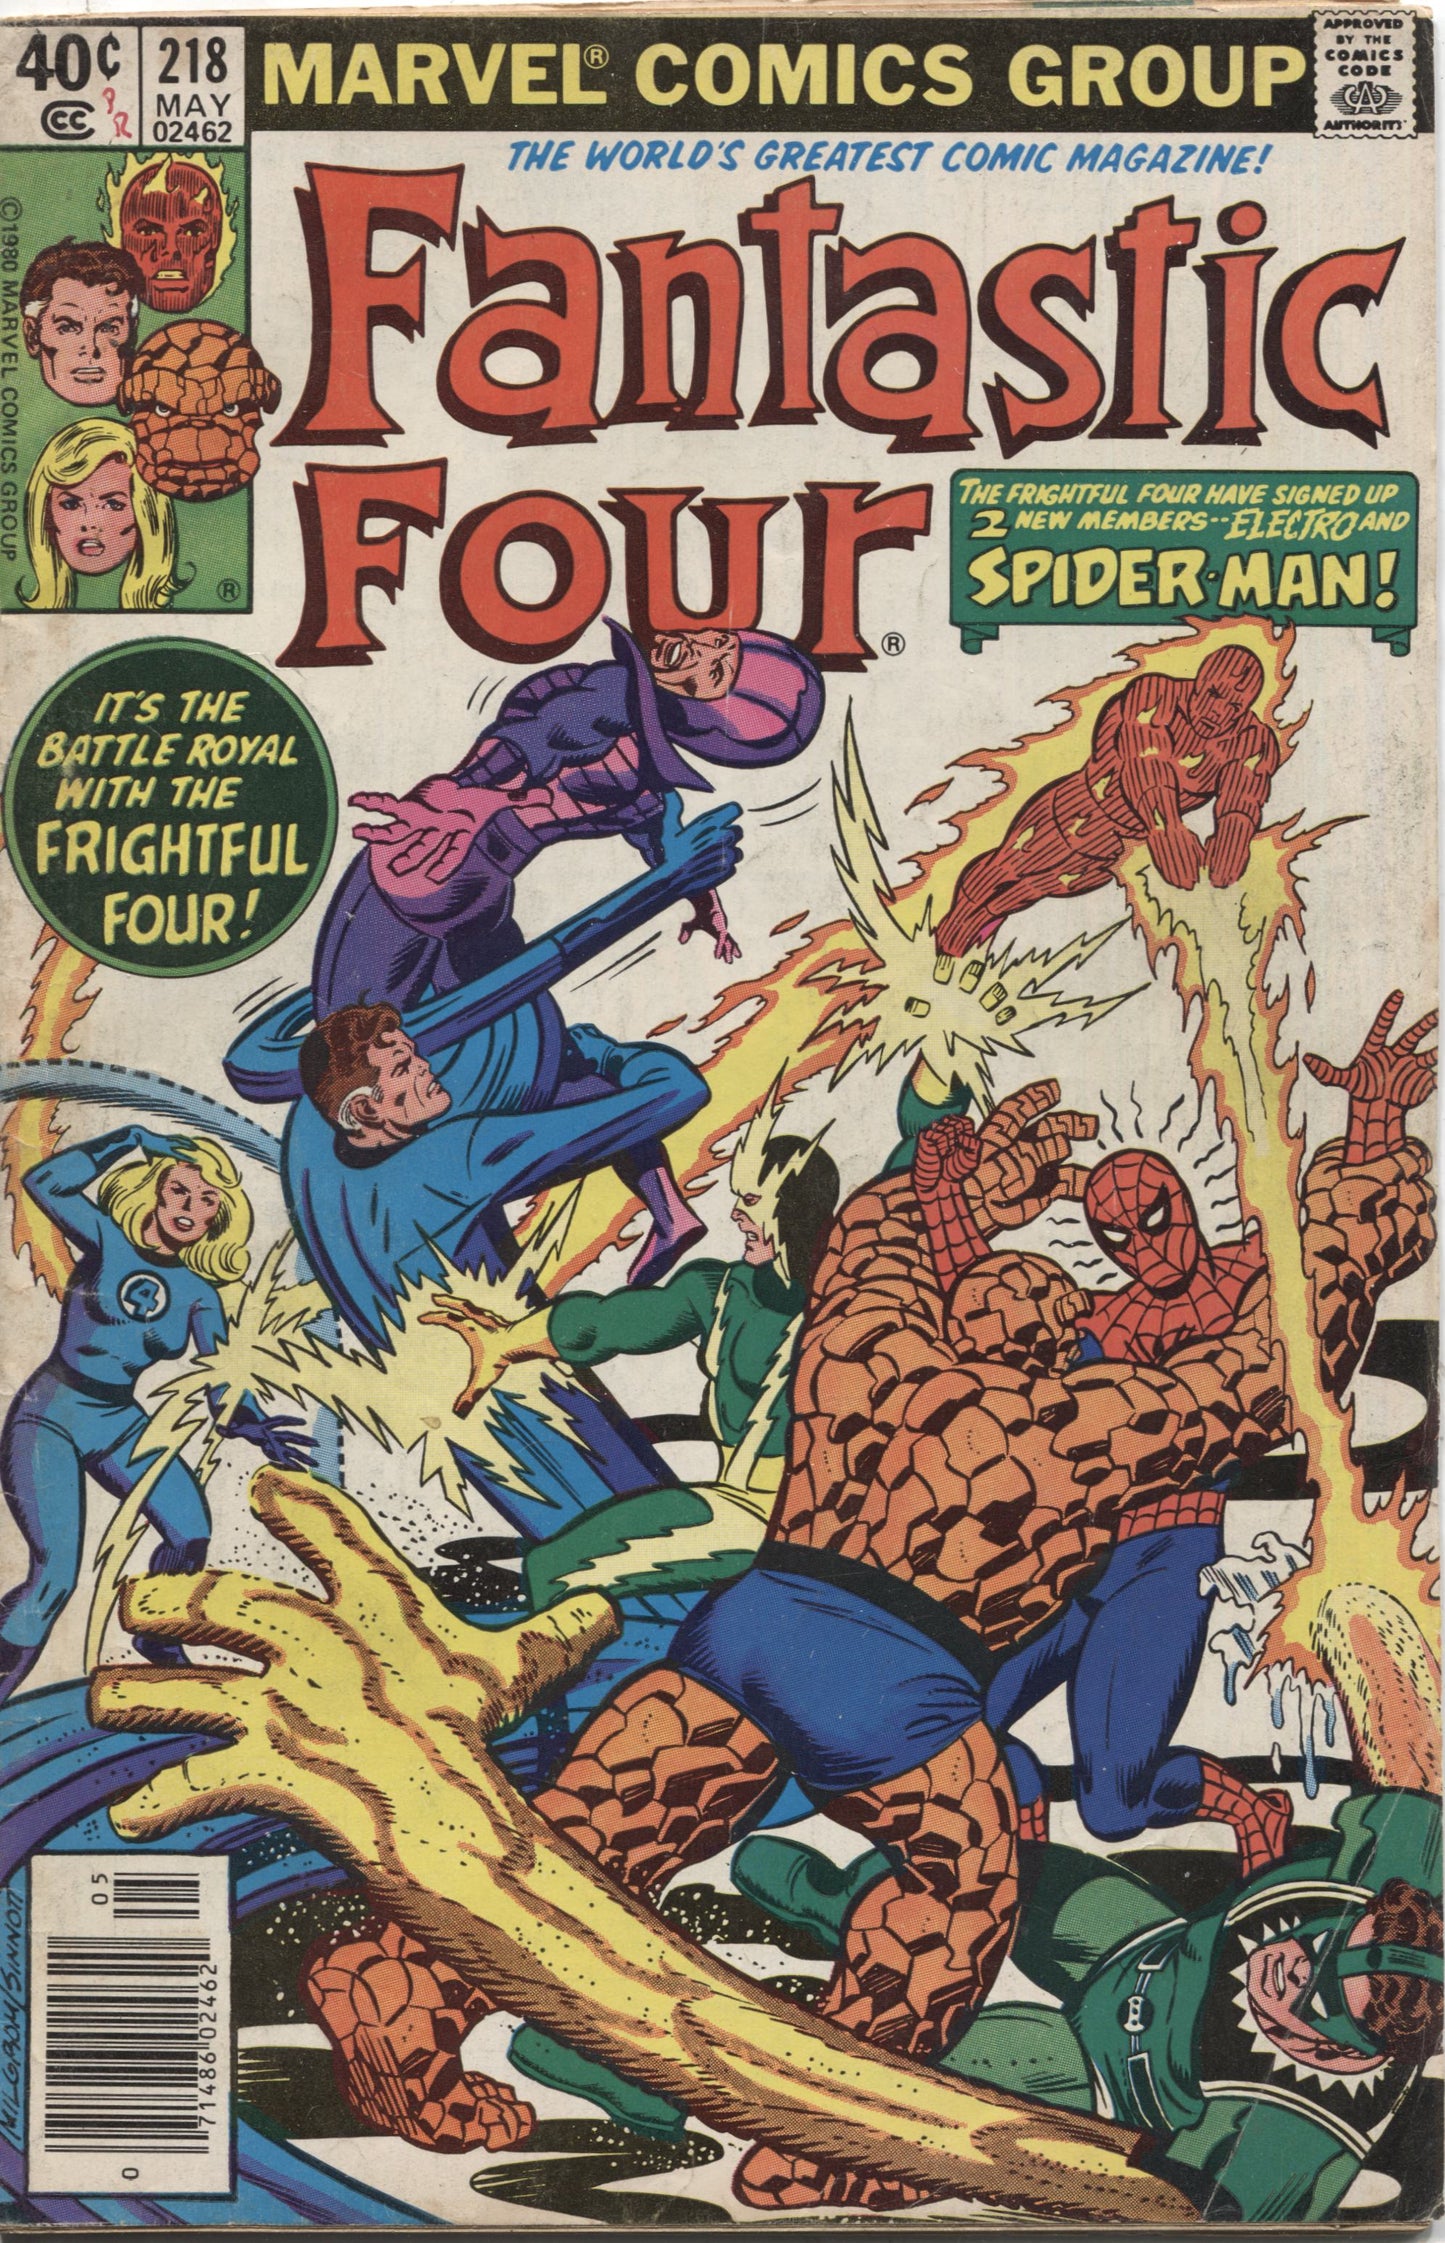 Fantastic Four No. 218, Featuring Spider-Man, Marvel Comics, May 1980